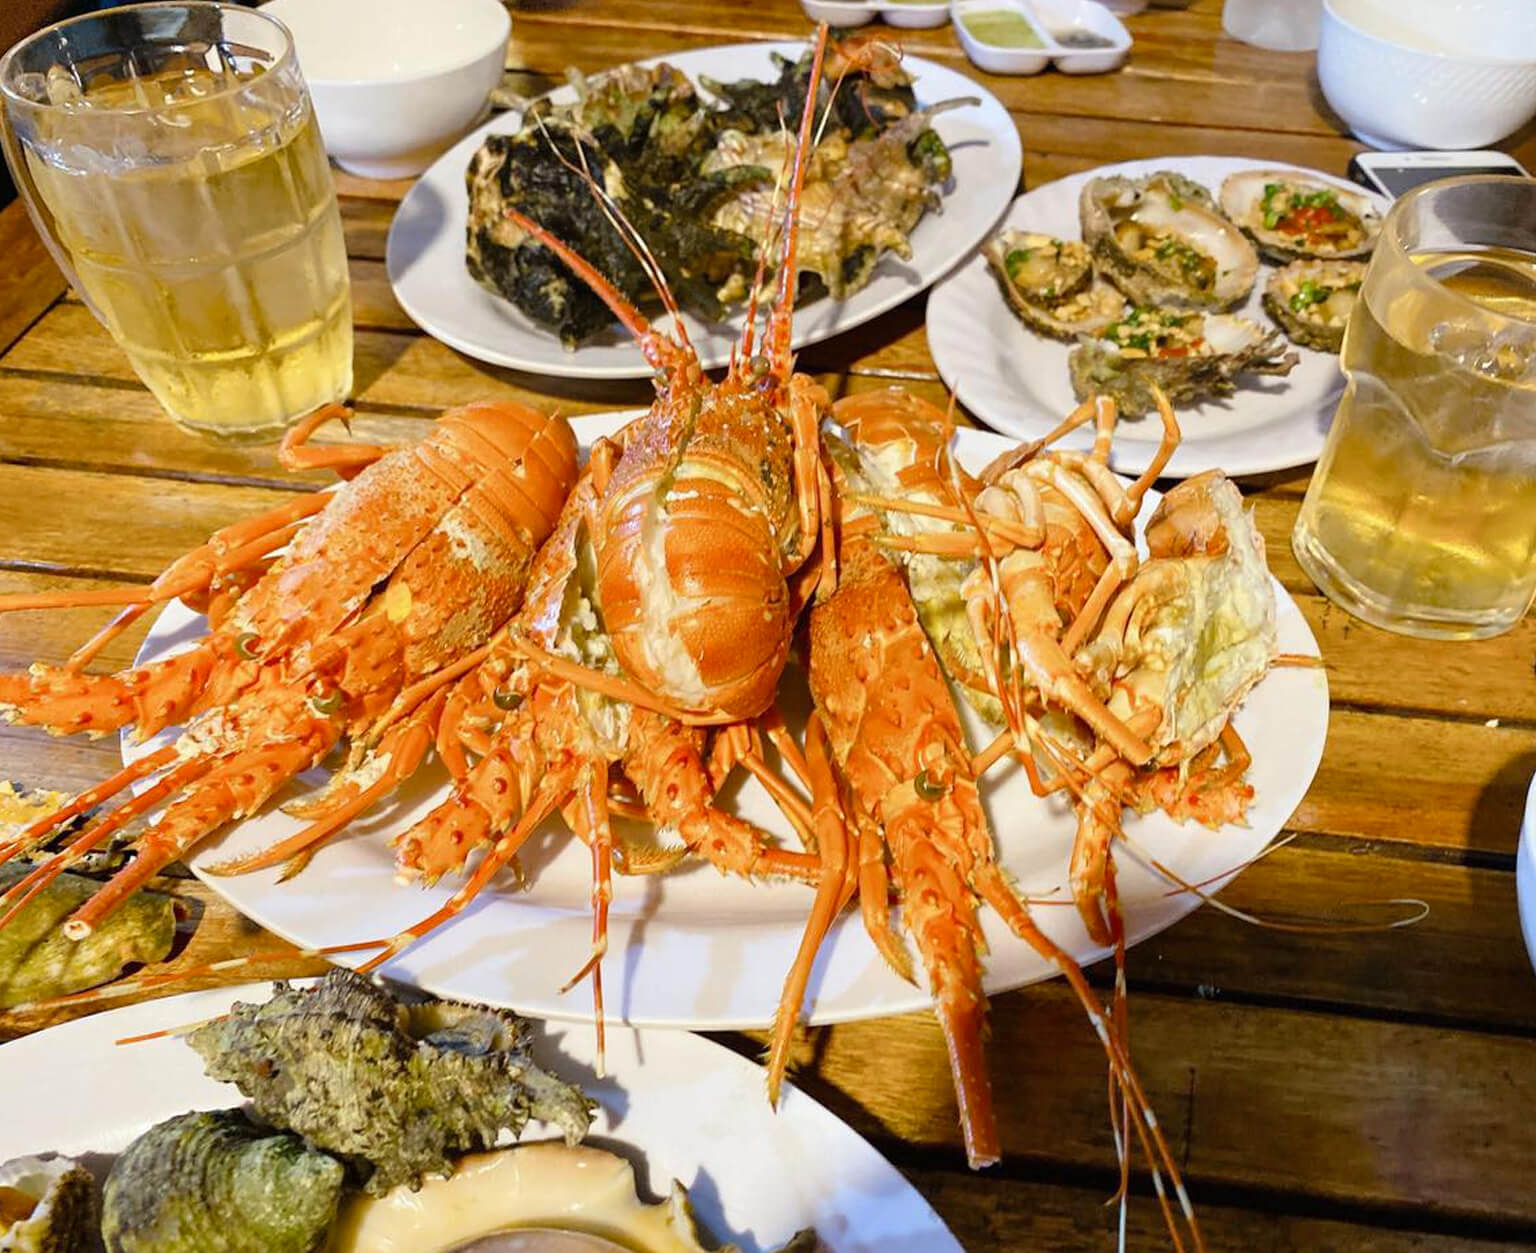 Lobster – The most famous specialty of Binh Ba island